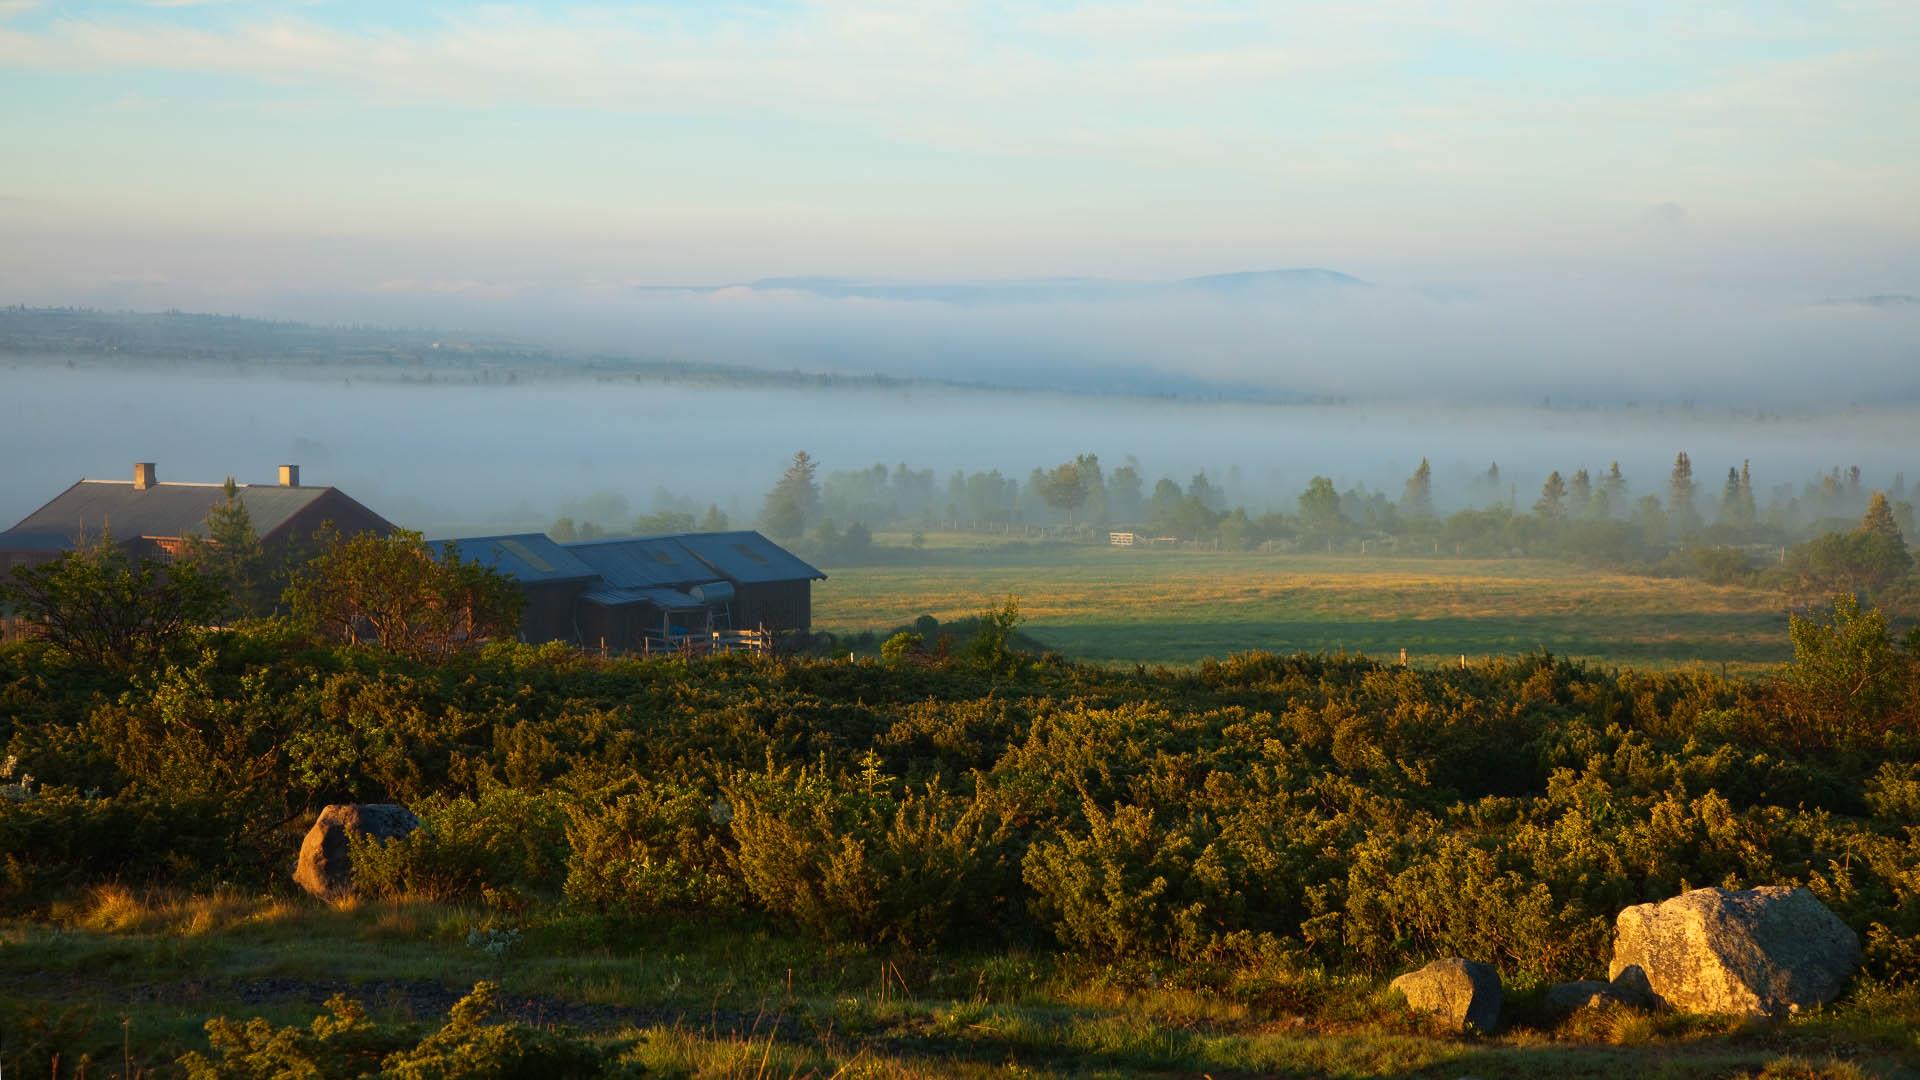 Morning scene on a mountain farm with pasture, farm house and juniper bushes as the sun breaks through the morning mist.